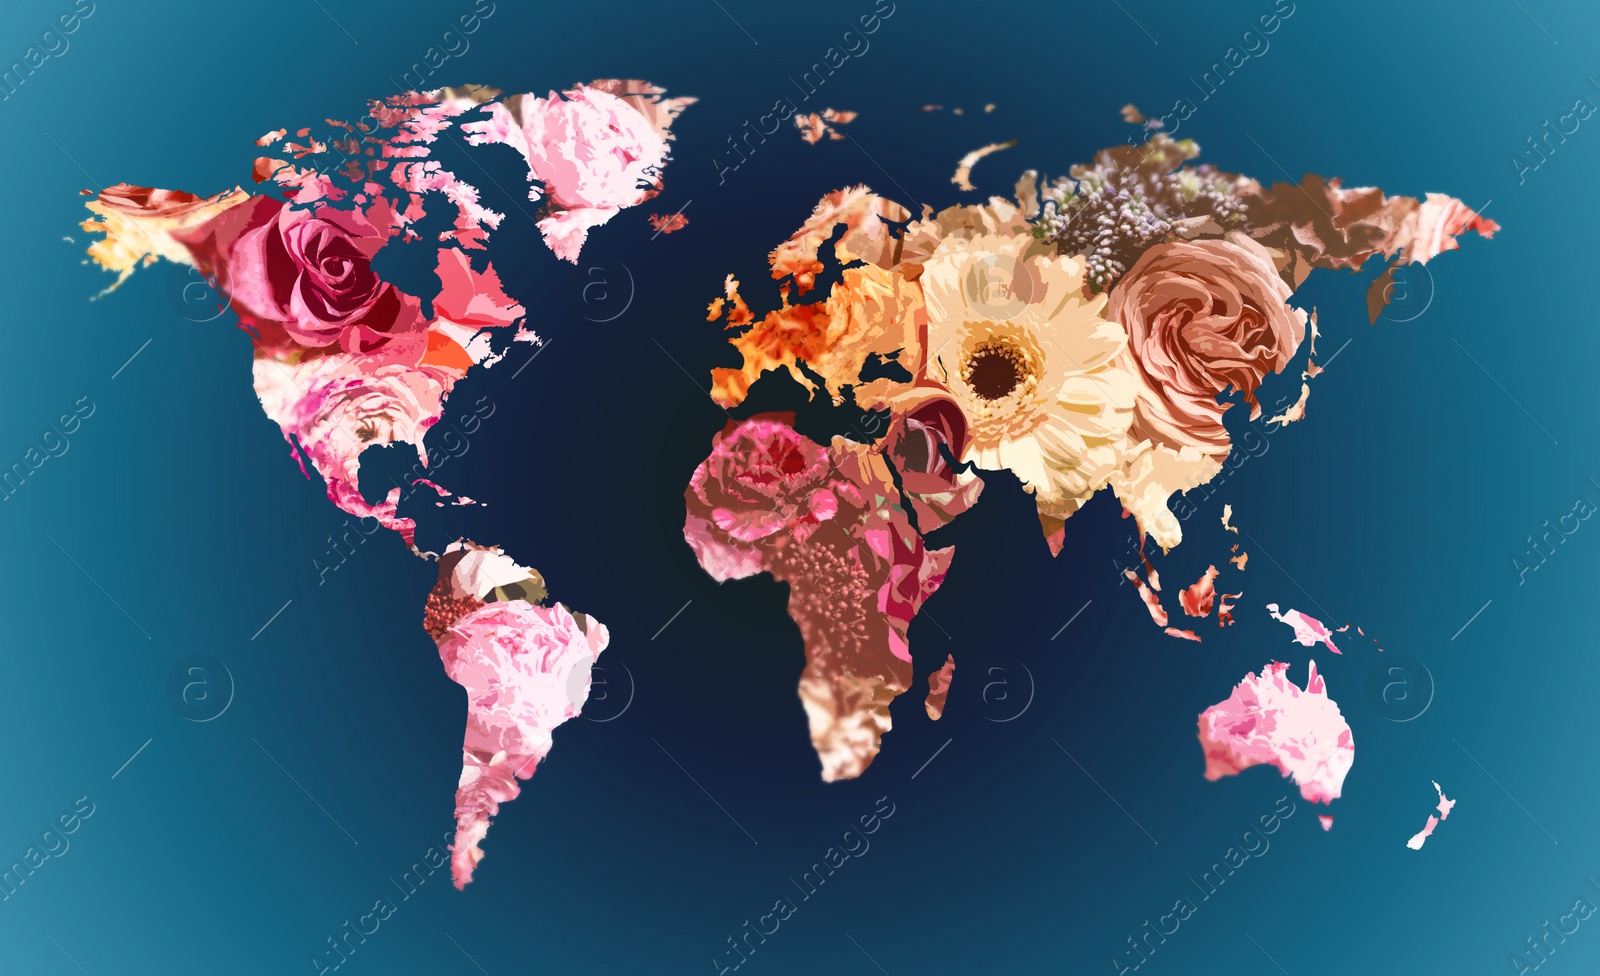 Image of World map made of beautiful flowers on blue background, banner design